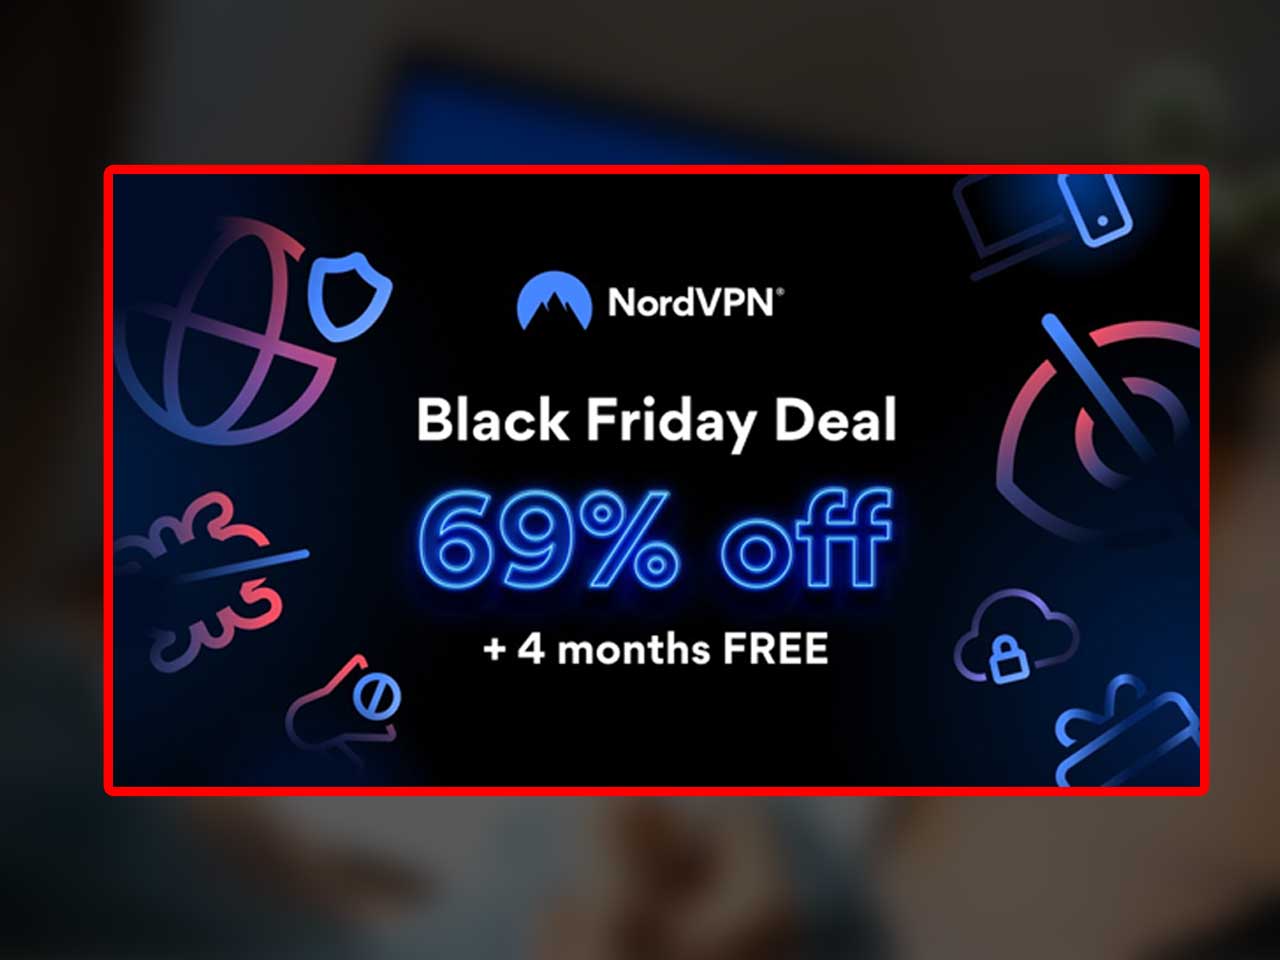 NordVPN go ‘ALL OUT’ with new Black Friday VPN deal for Streamers